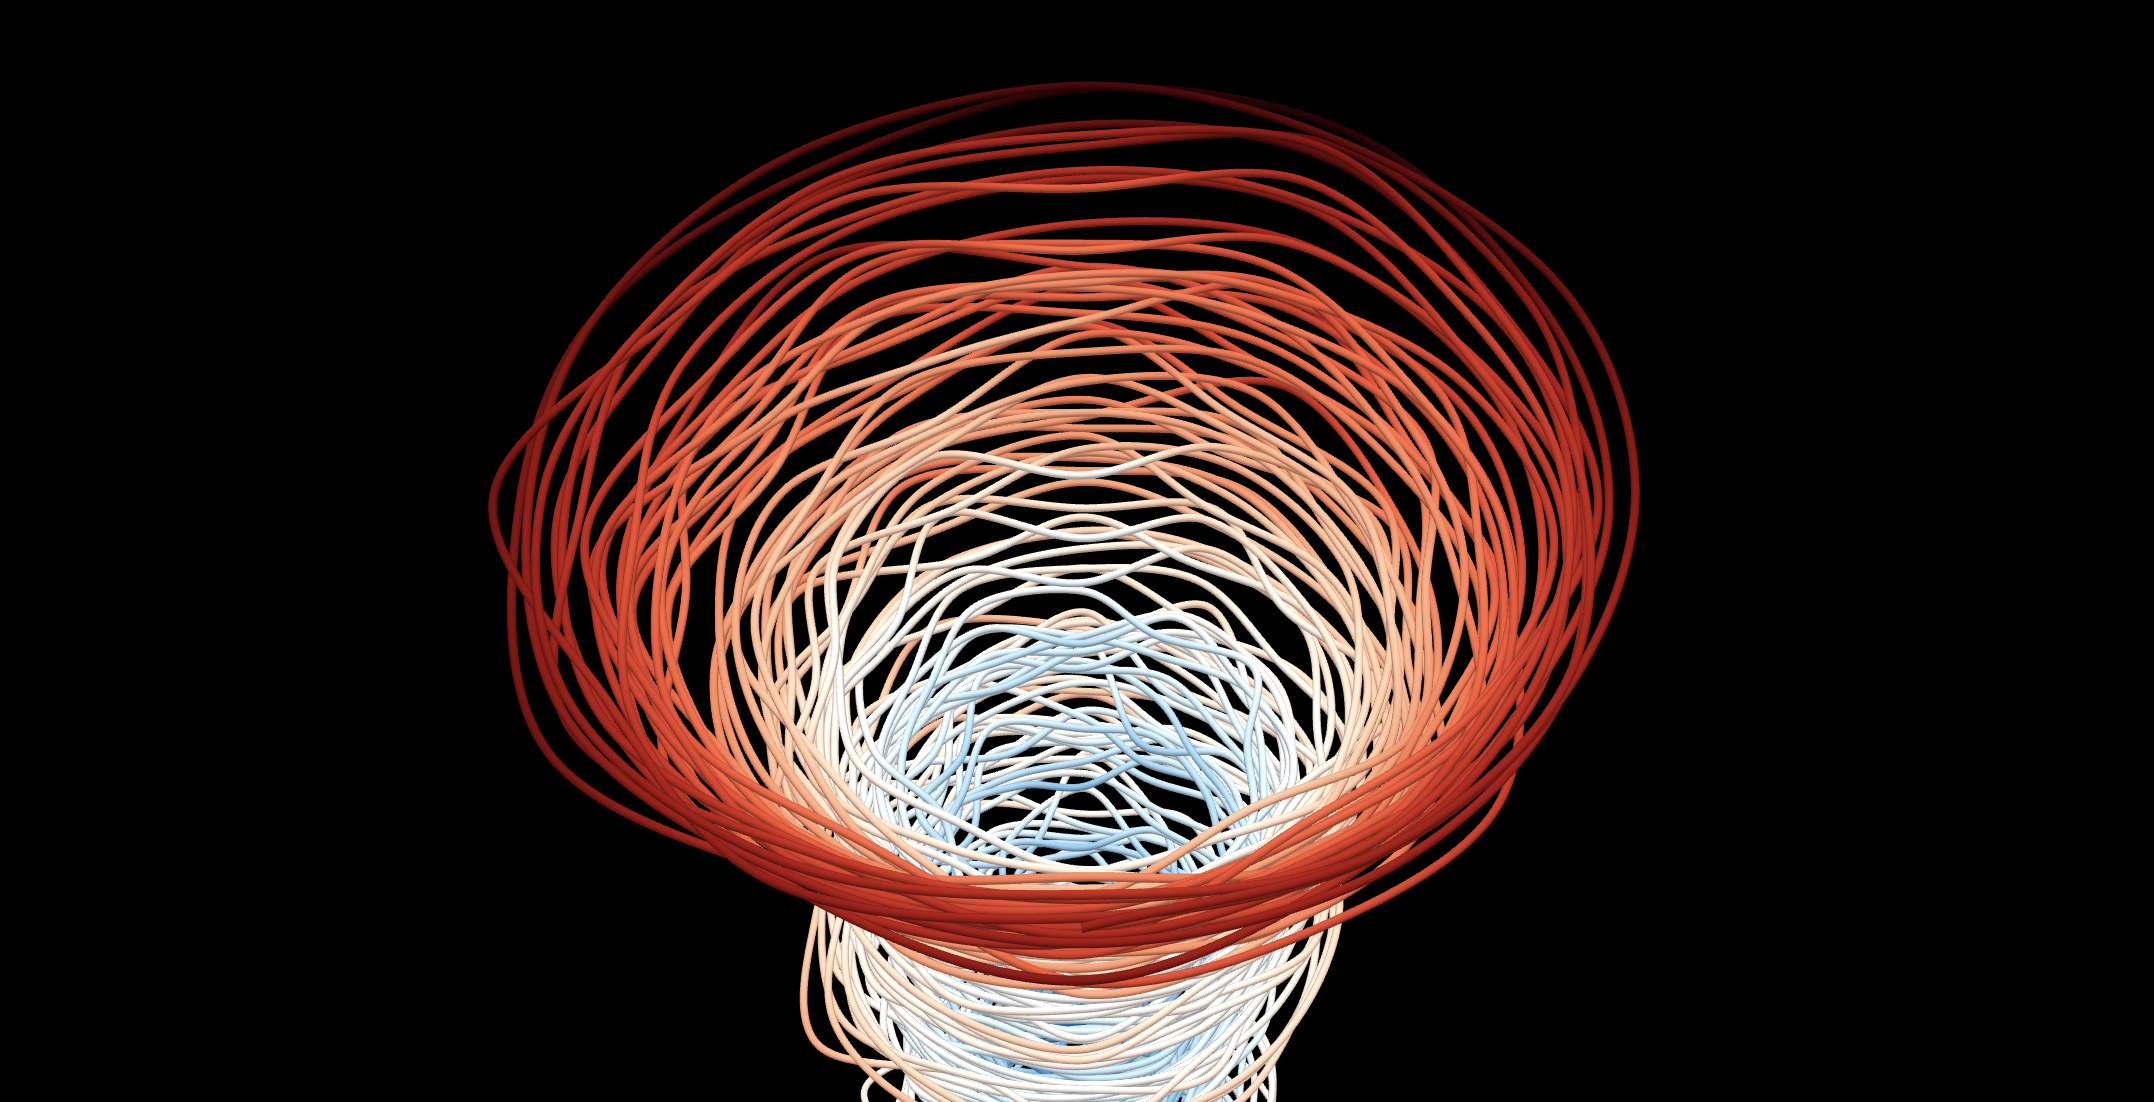 Preview image of the work "Climate Spiral: Three.js"